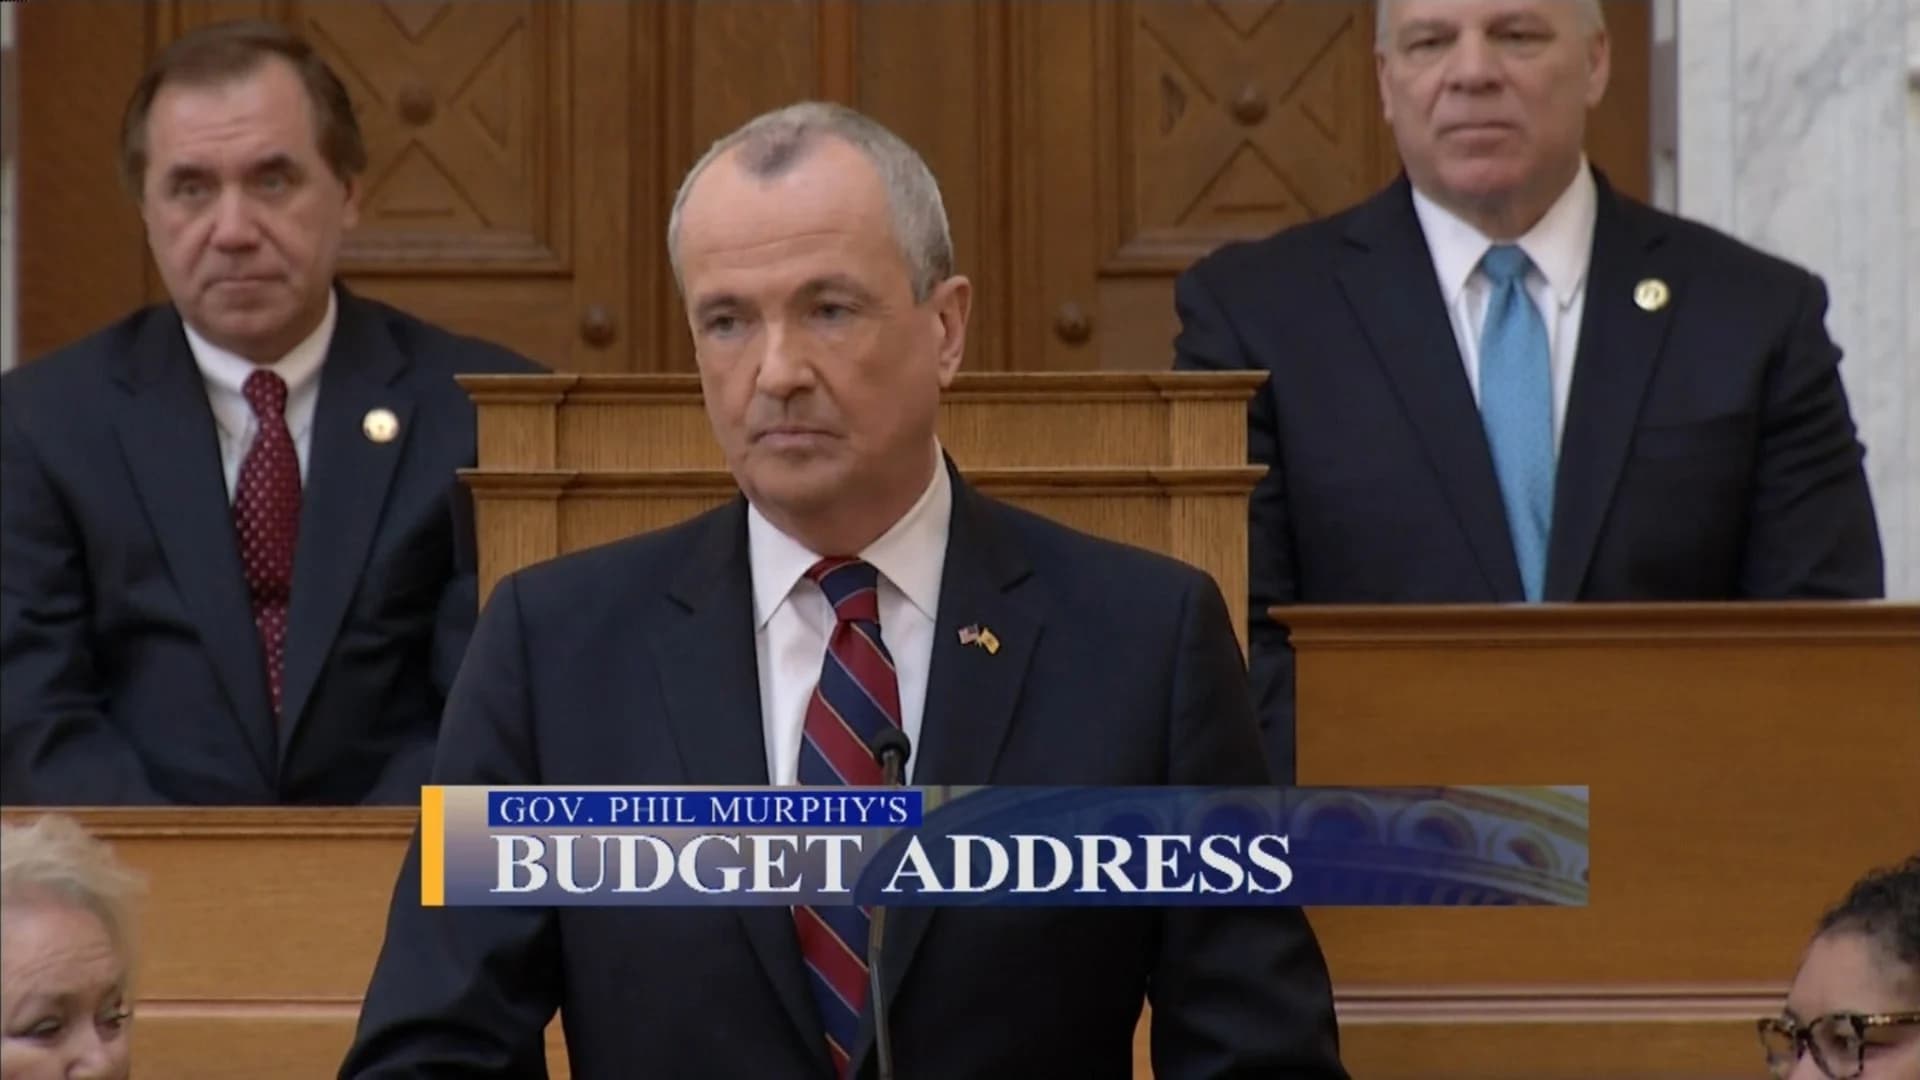 Gov. Murphy introduces 2019 budget in State House address